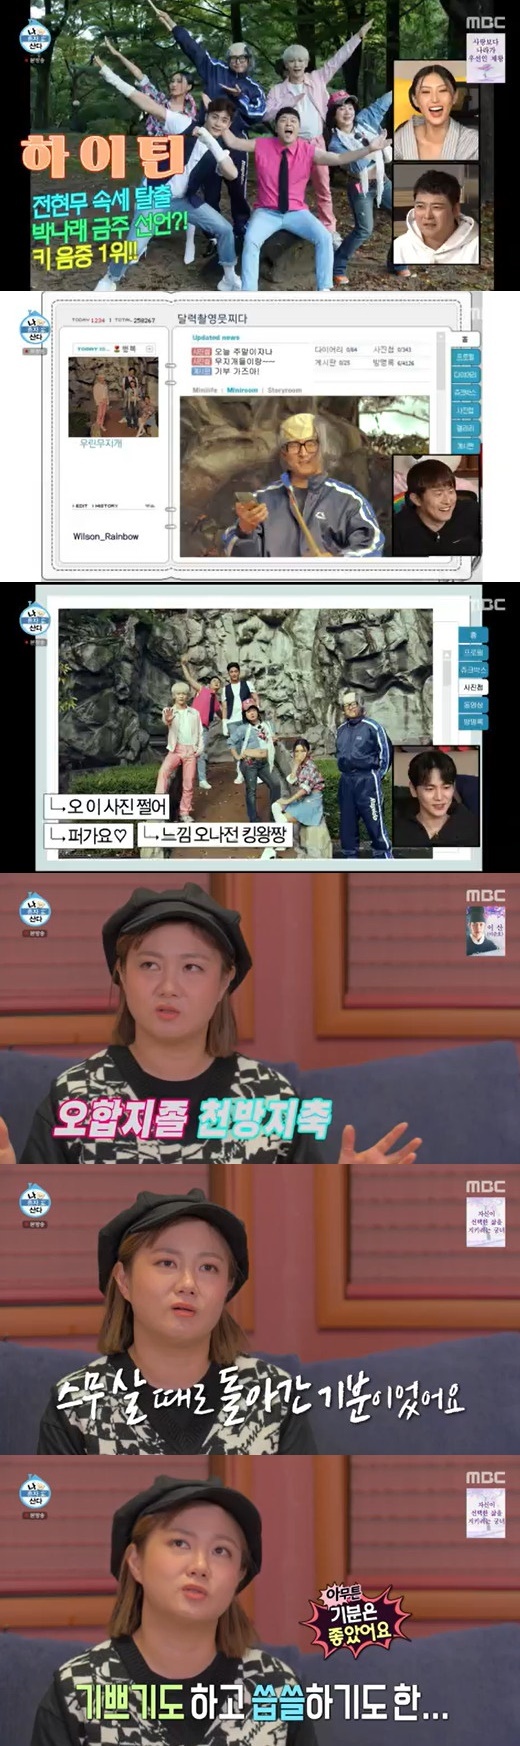 In I Live Alone, broadcaster Jun Hyun-moo and gag woman Park Na-rae became fashion destroyer with bold exposure and laughed.MBC I Live Alone broadcast on the afternoon of the 12th, 2020 The Rainbow Calendar shooting scene was released.Webtoon writer Kian84 is in charge of shooting in March, explaining, Start and Dog health are the concept: Lets go back to youth and take pictures with the heart of a newbie.At the request of Kian84, all members turned into retro styles in the early 2000s.Among them, Jun Hyun-moo wore a sleeveless shirt, attracting attention with armpit hair exposure fashion.Mamamu Hwasa was surprised that it was too dirty, and Park Na-rae also responded, What is so black?Actor Sung Hoon also said, I met the members for a long time, and everyone is dirty.Jun Hyun-moo said, Kian84 told me to wear it like this. Especially, this suit added surprise to the release of the fashion reversal that followed actor Jo In-sung.The following, Park Na-rae, was also unconventional: wearing croppies and boldly exposing Choi Yong-soo, who said: Its fashion around 2004-2006.I have a picture taken at the time in this way in my house. Since then, Park Na-rae has been filming with Sung Hoon for a three-month-old lover.But Sung Hoon was not focused because of Park Na-rae Choi Yong-soos fatal presence.He glanced at it and said, Why do the vision fall to the ship?Park Na-rae himself responded by saying, Why did you get so many boats when it was definitely fasting?Kian84, who held the camera, even turned his head, saying, Afterward.Park Na-rae said, We feel like we met at a club meeting rather than meeting in the department.It is a mismatch, a relief axis, and a collision.I felt like I was really 20 years old, I was happy, but on the other hand I was bitter, but I felt so good, he said.